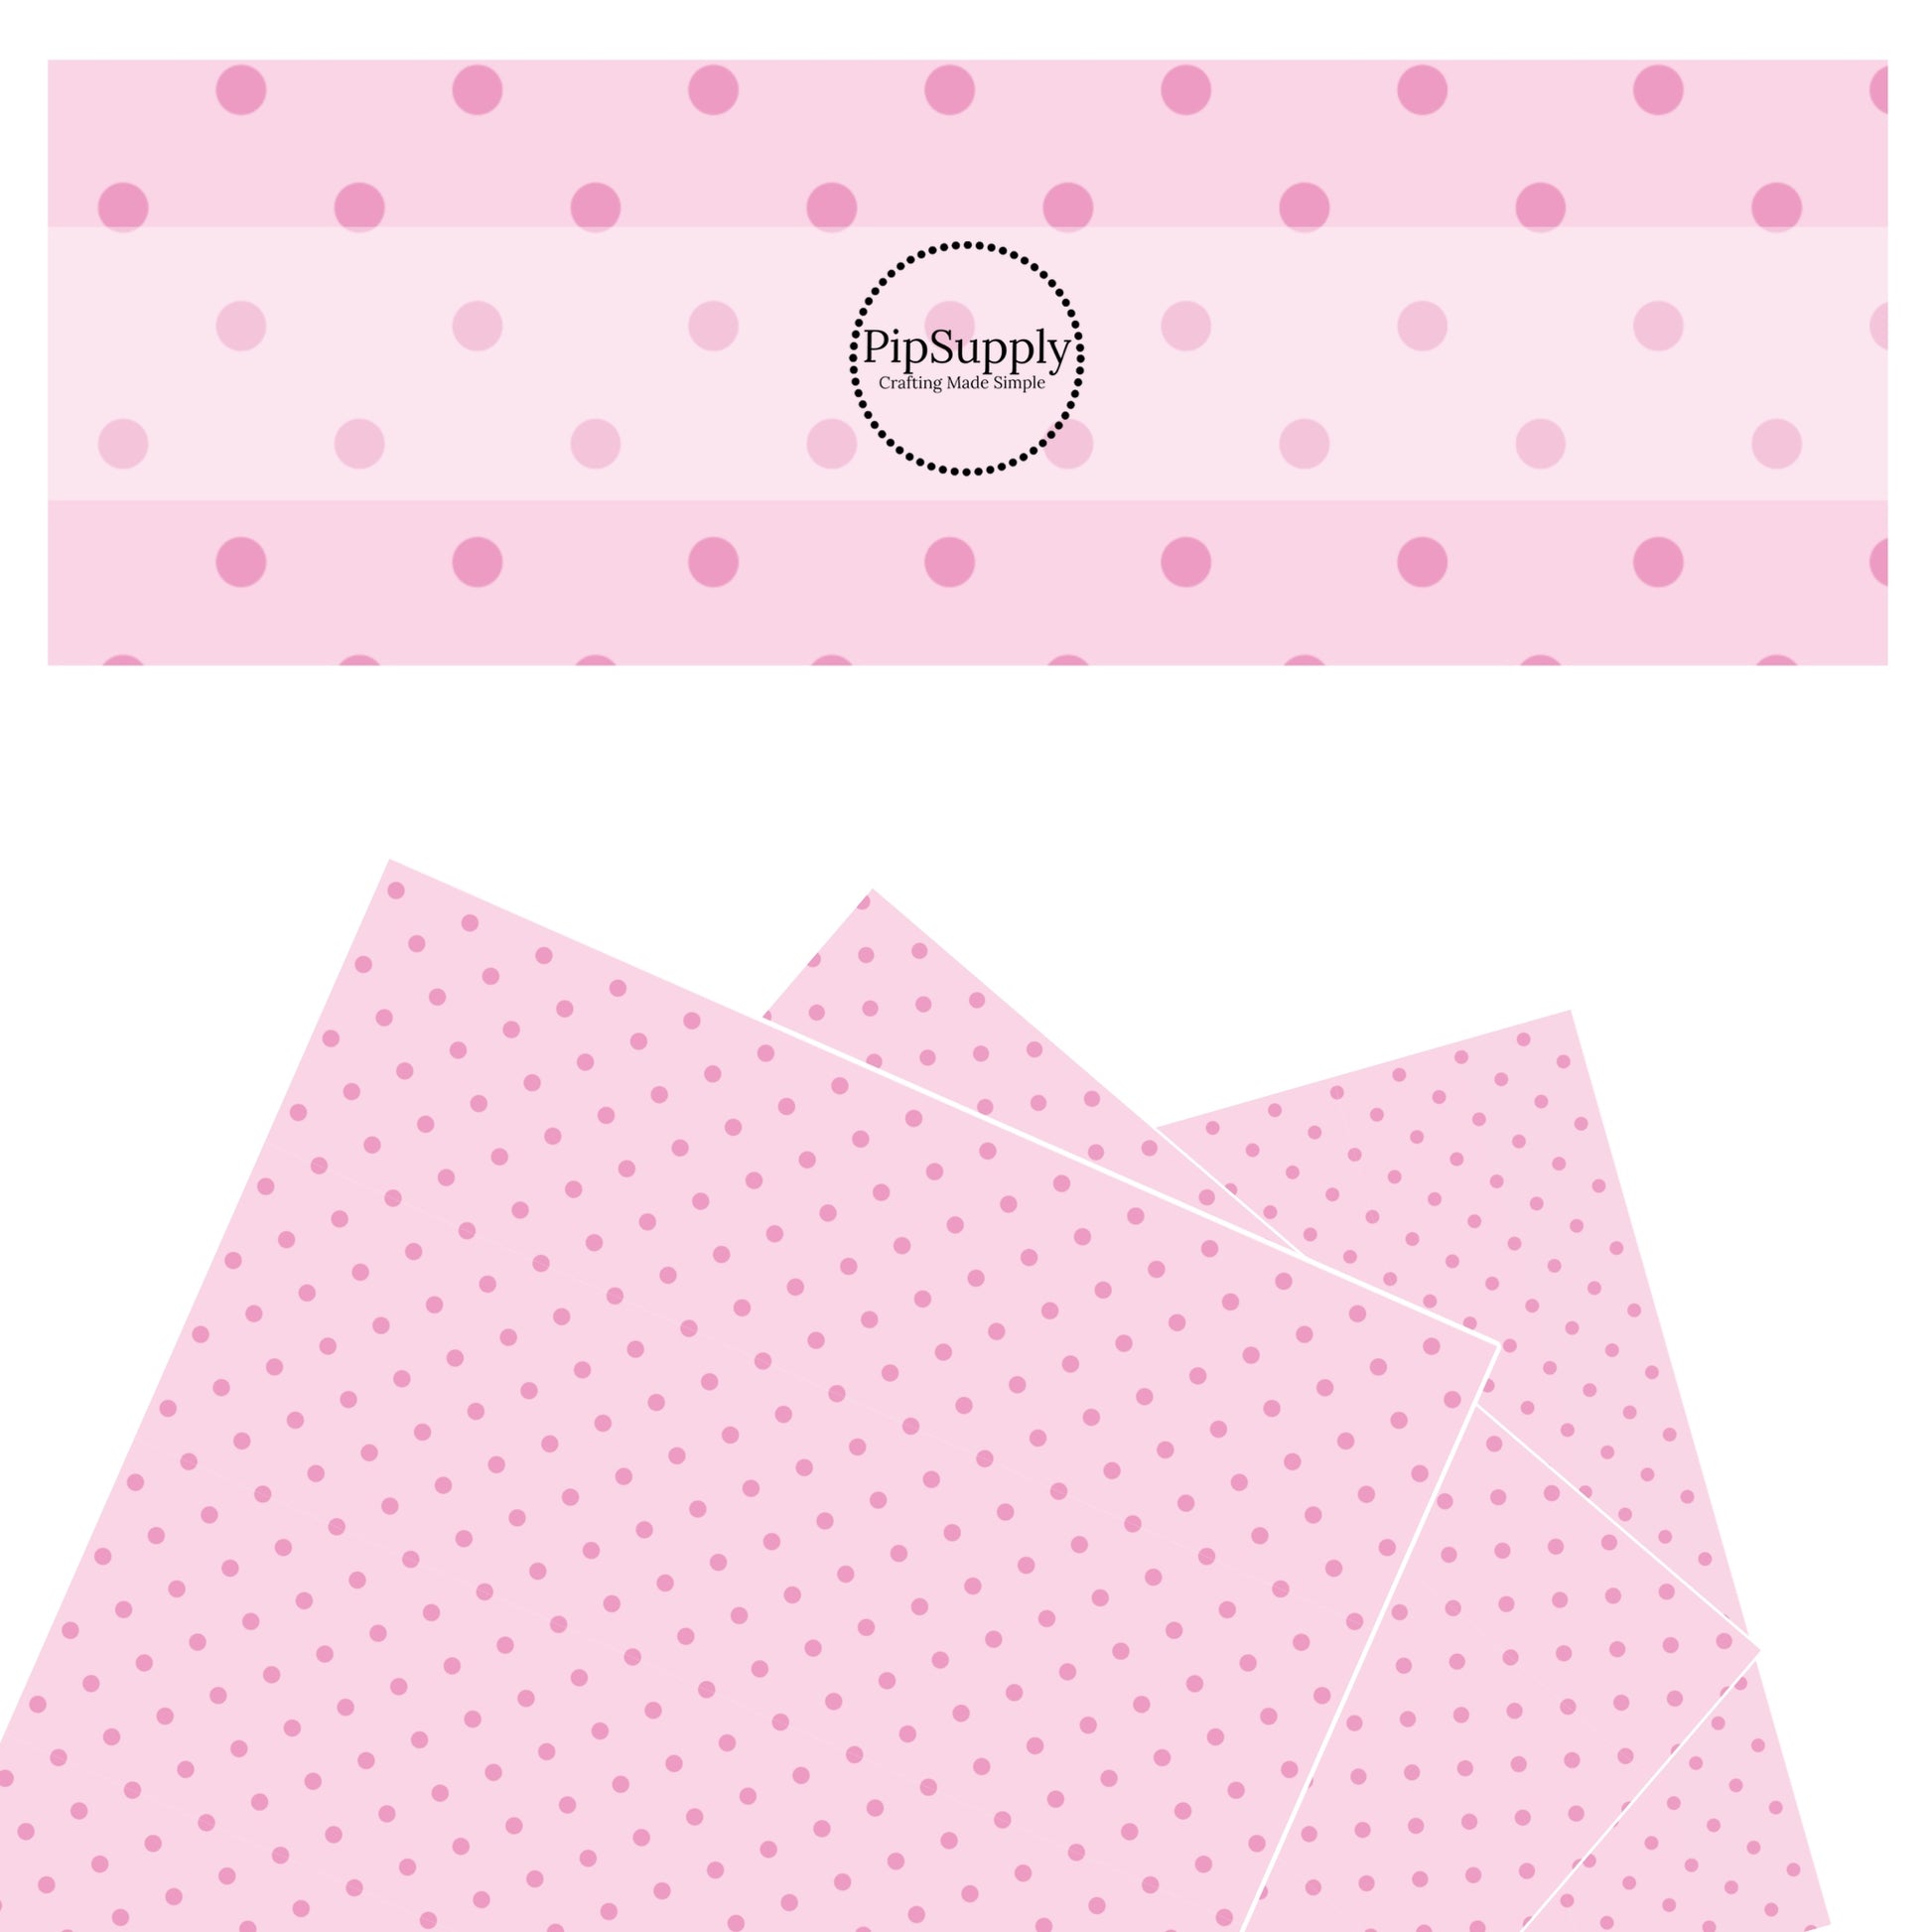 These celebration faux leather sheets contain the following design elements: pink dots on light pink. Our CPSIA compliant faux leather sheets or rolls can be used for all types of crafting projects.